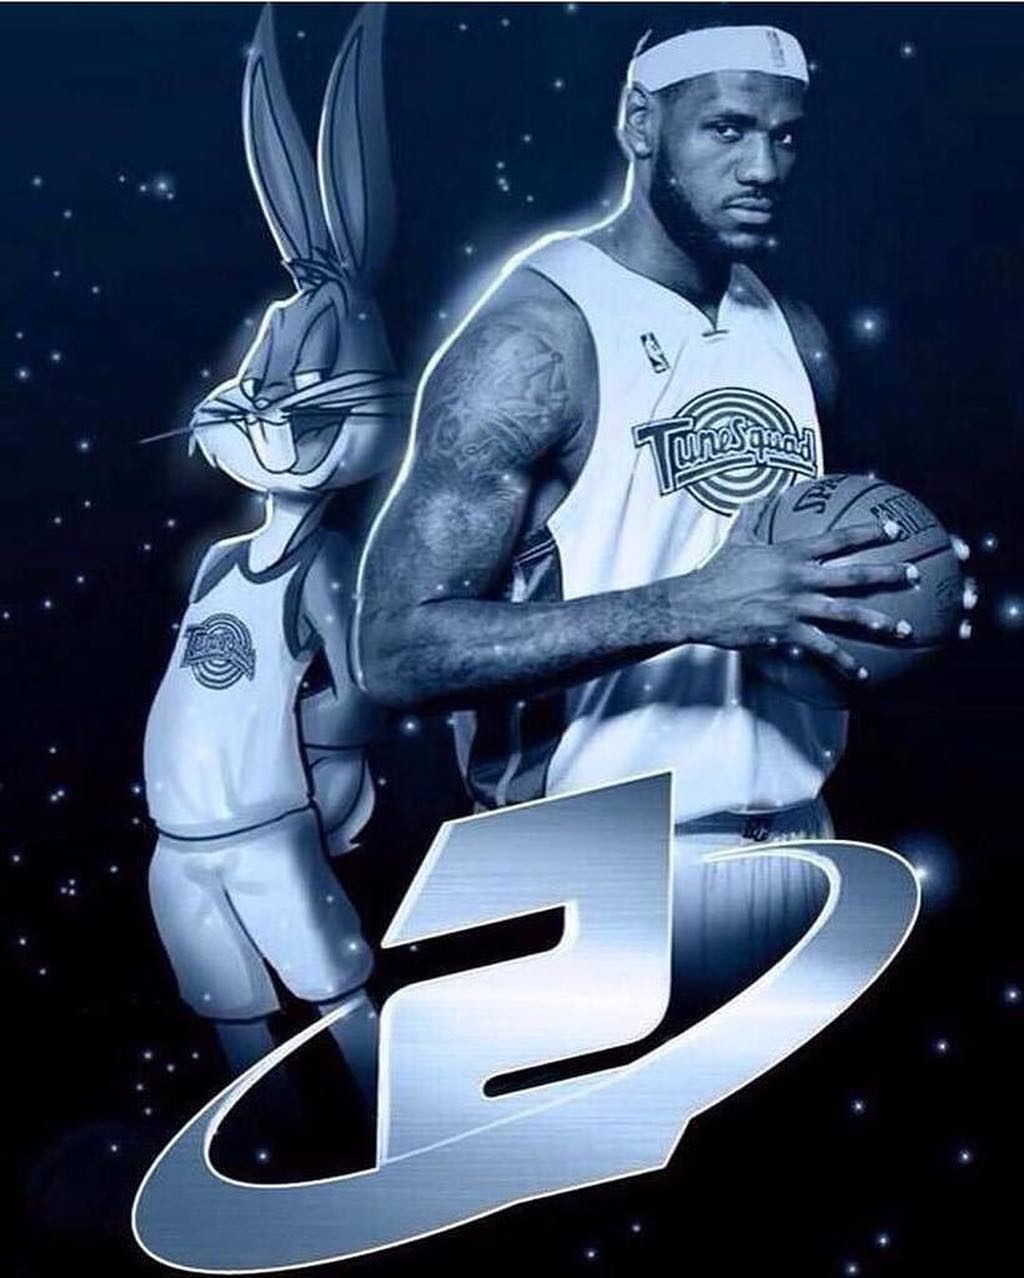 Space Jam Trailer To Release On July 4th After Lebron James